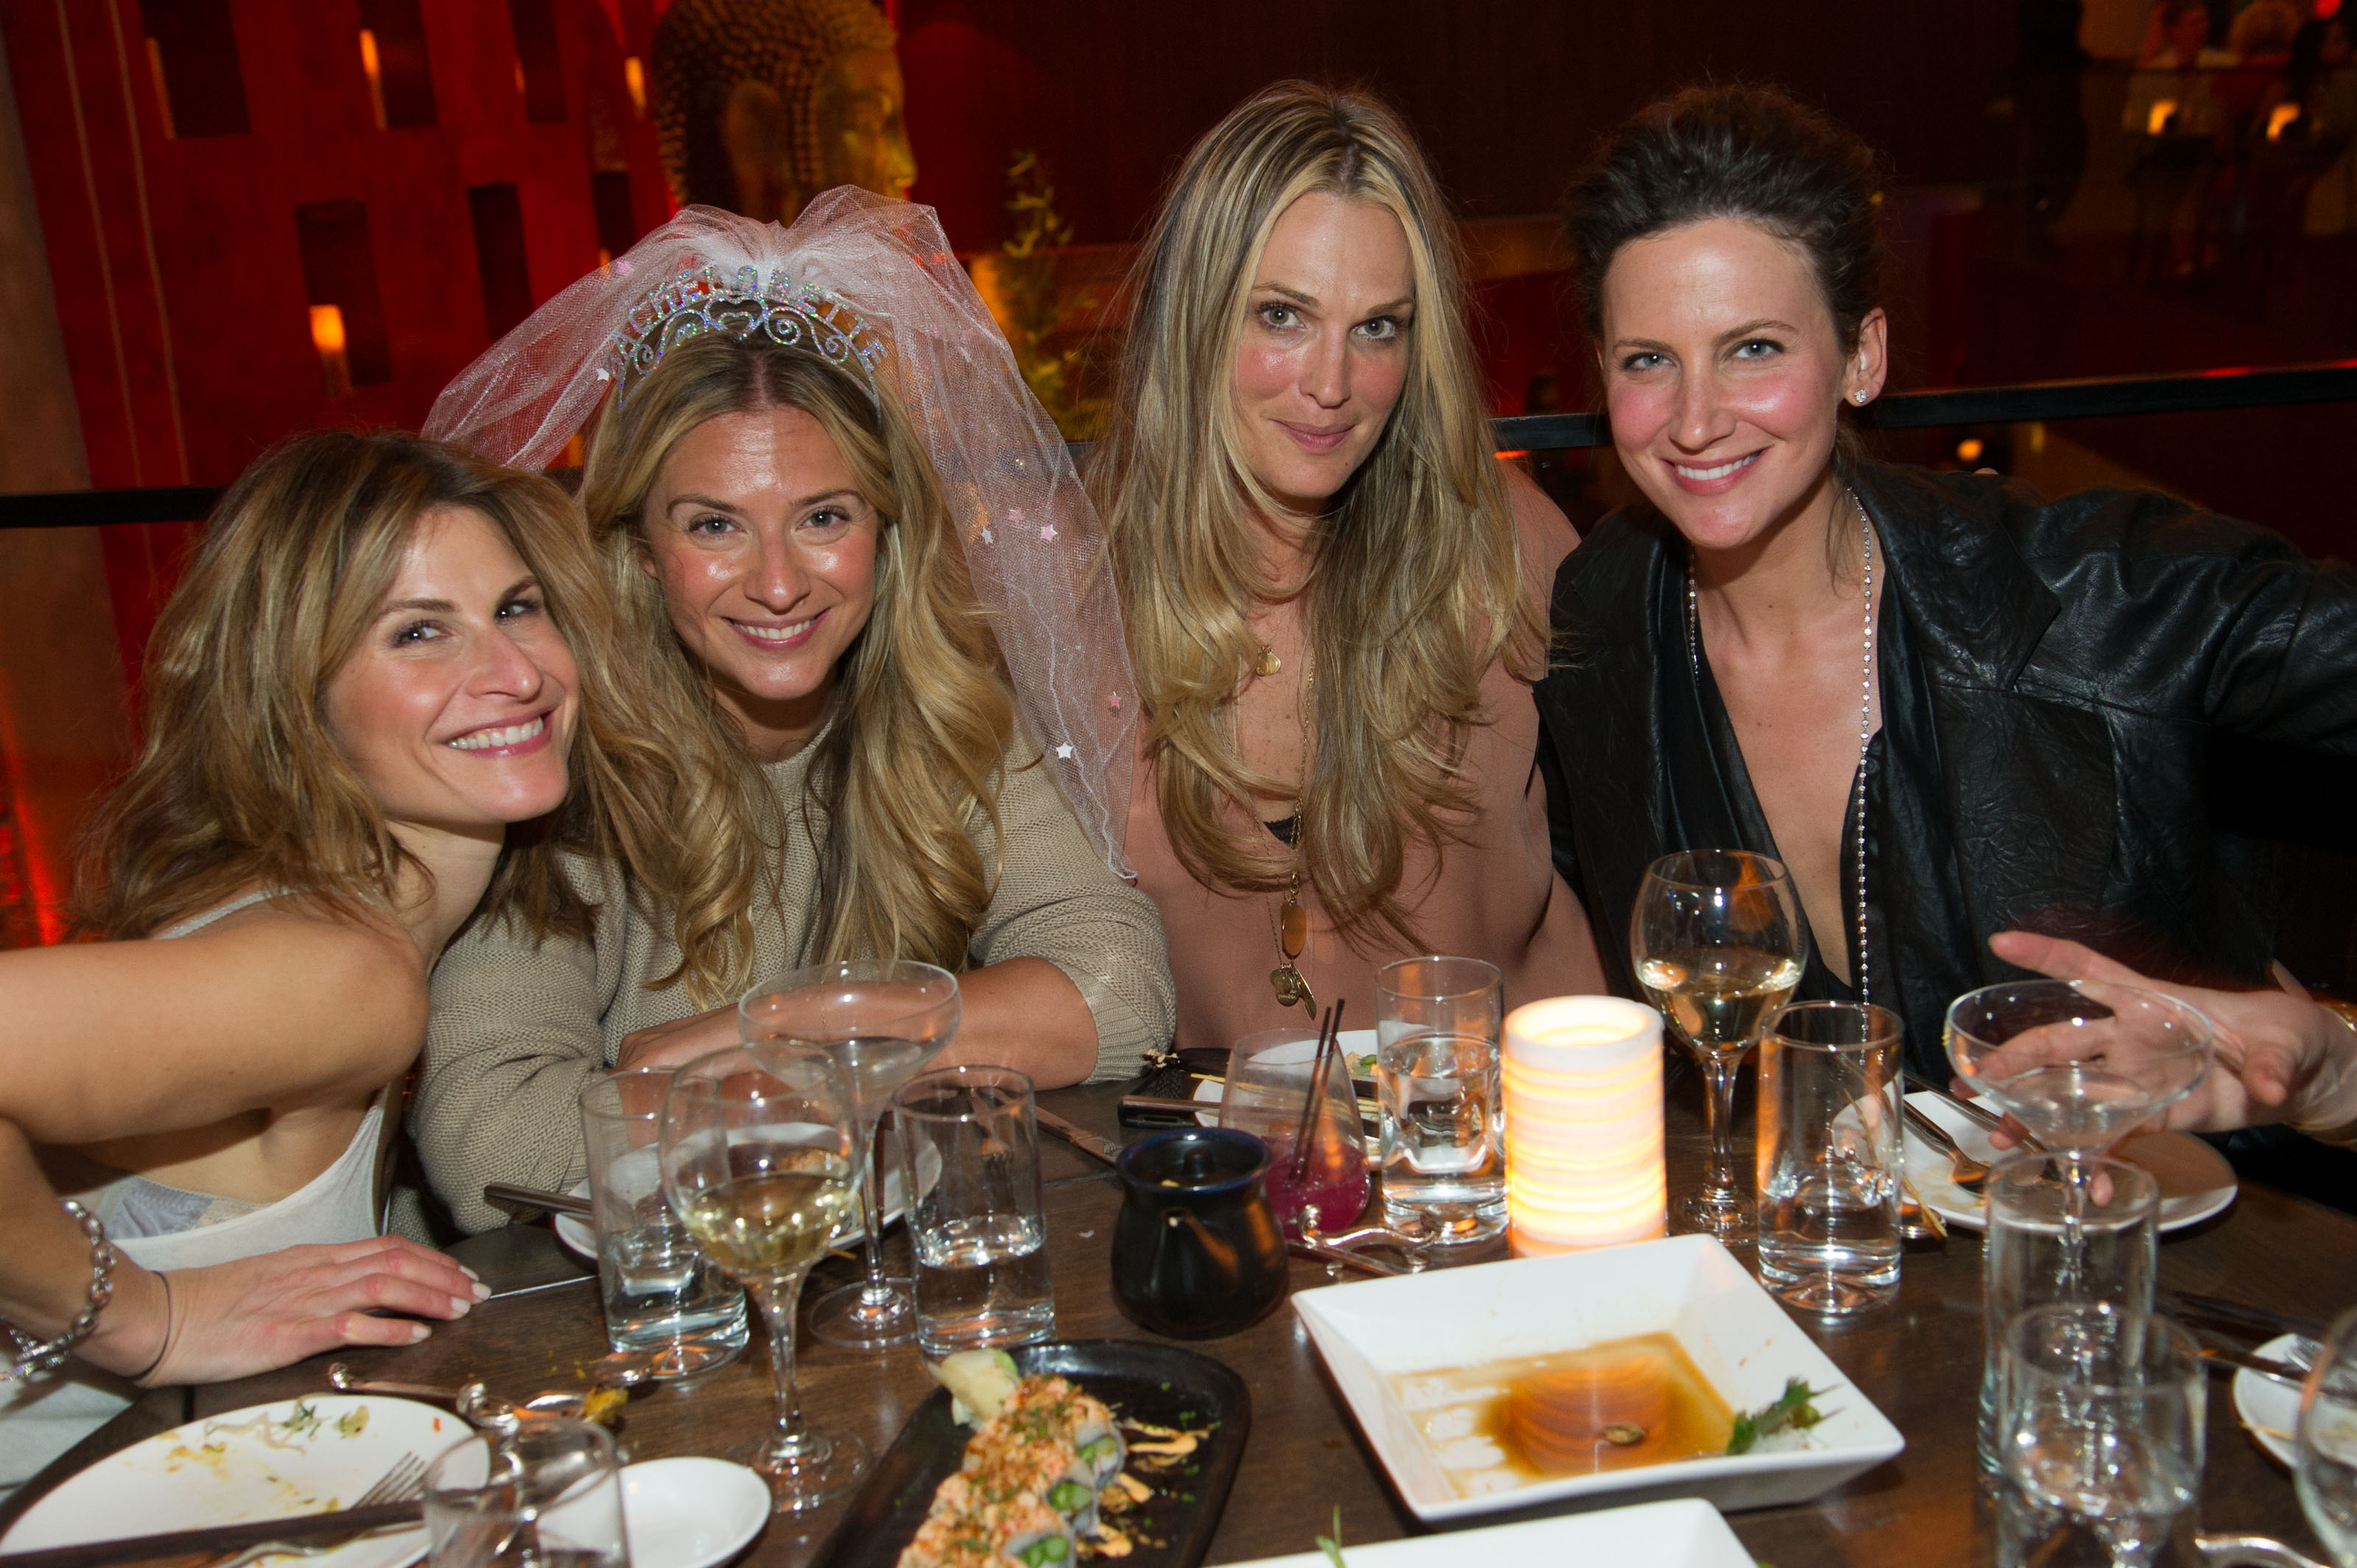 Molly Sims Celebrates a friend's Bachelorette Party at TAO